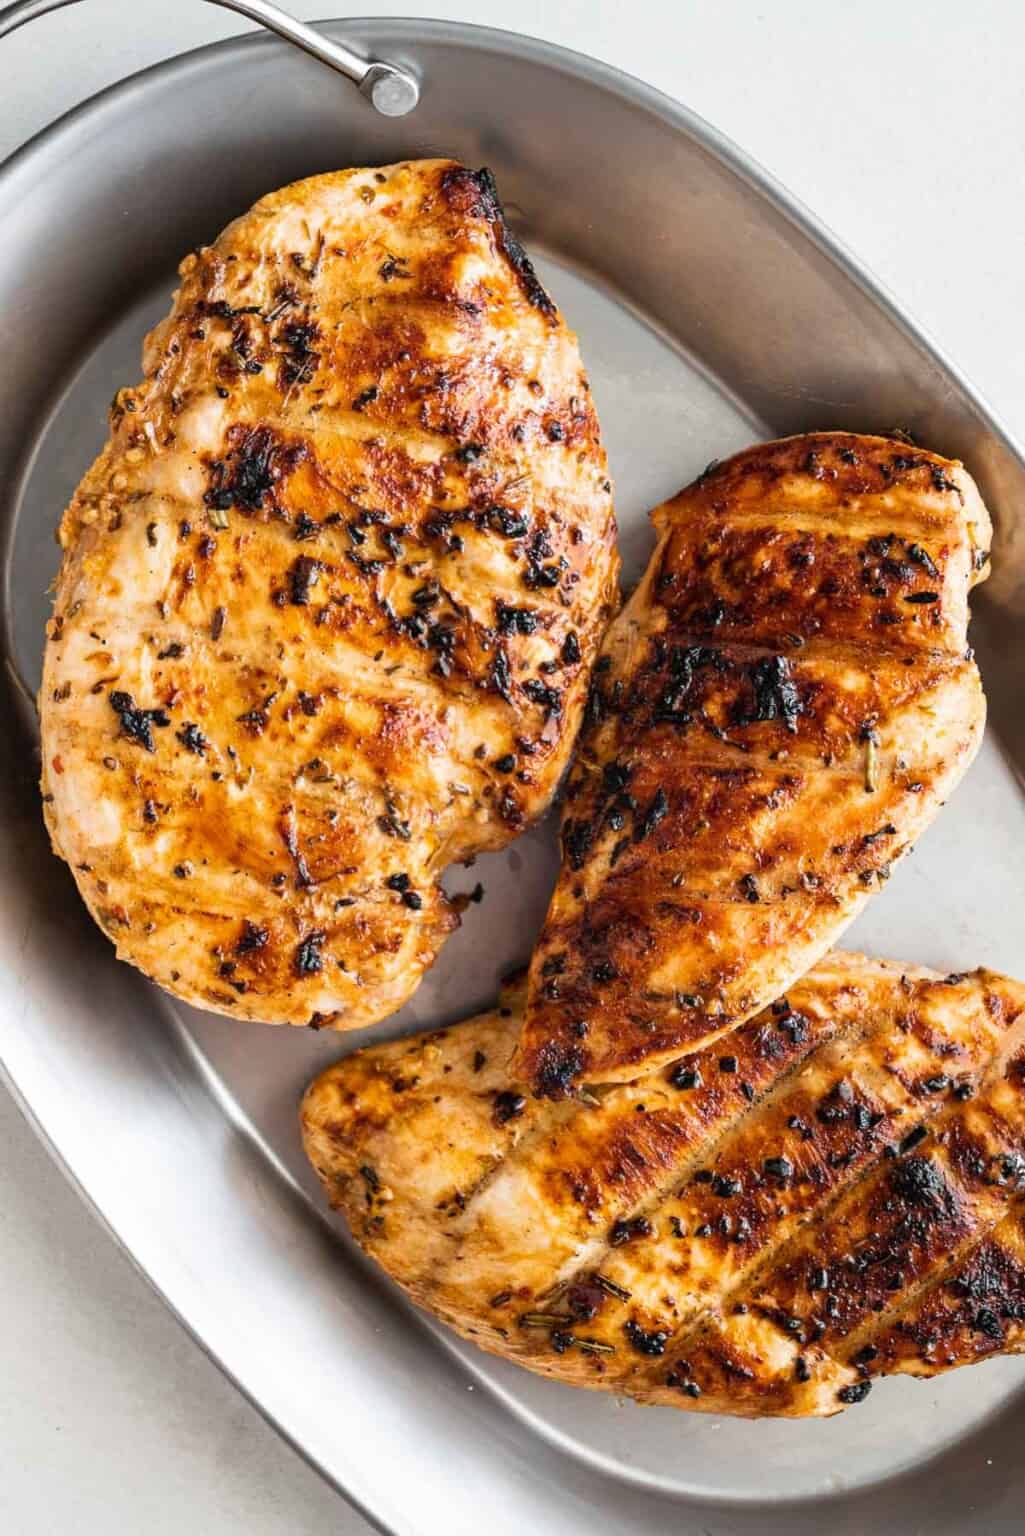 Grilled Chicken Breast (Juicy and Tender) | The Mediterranean Dish